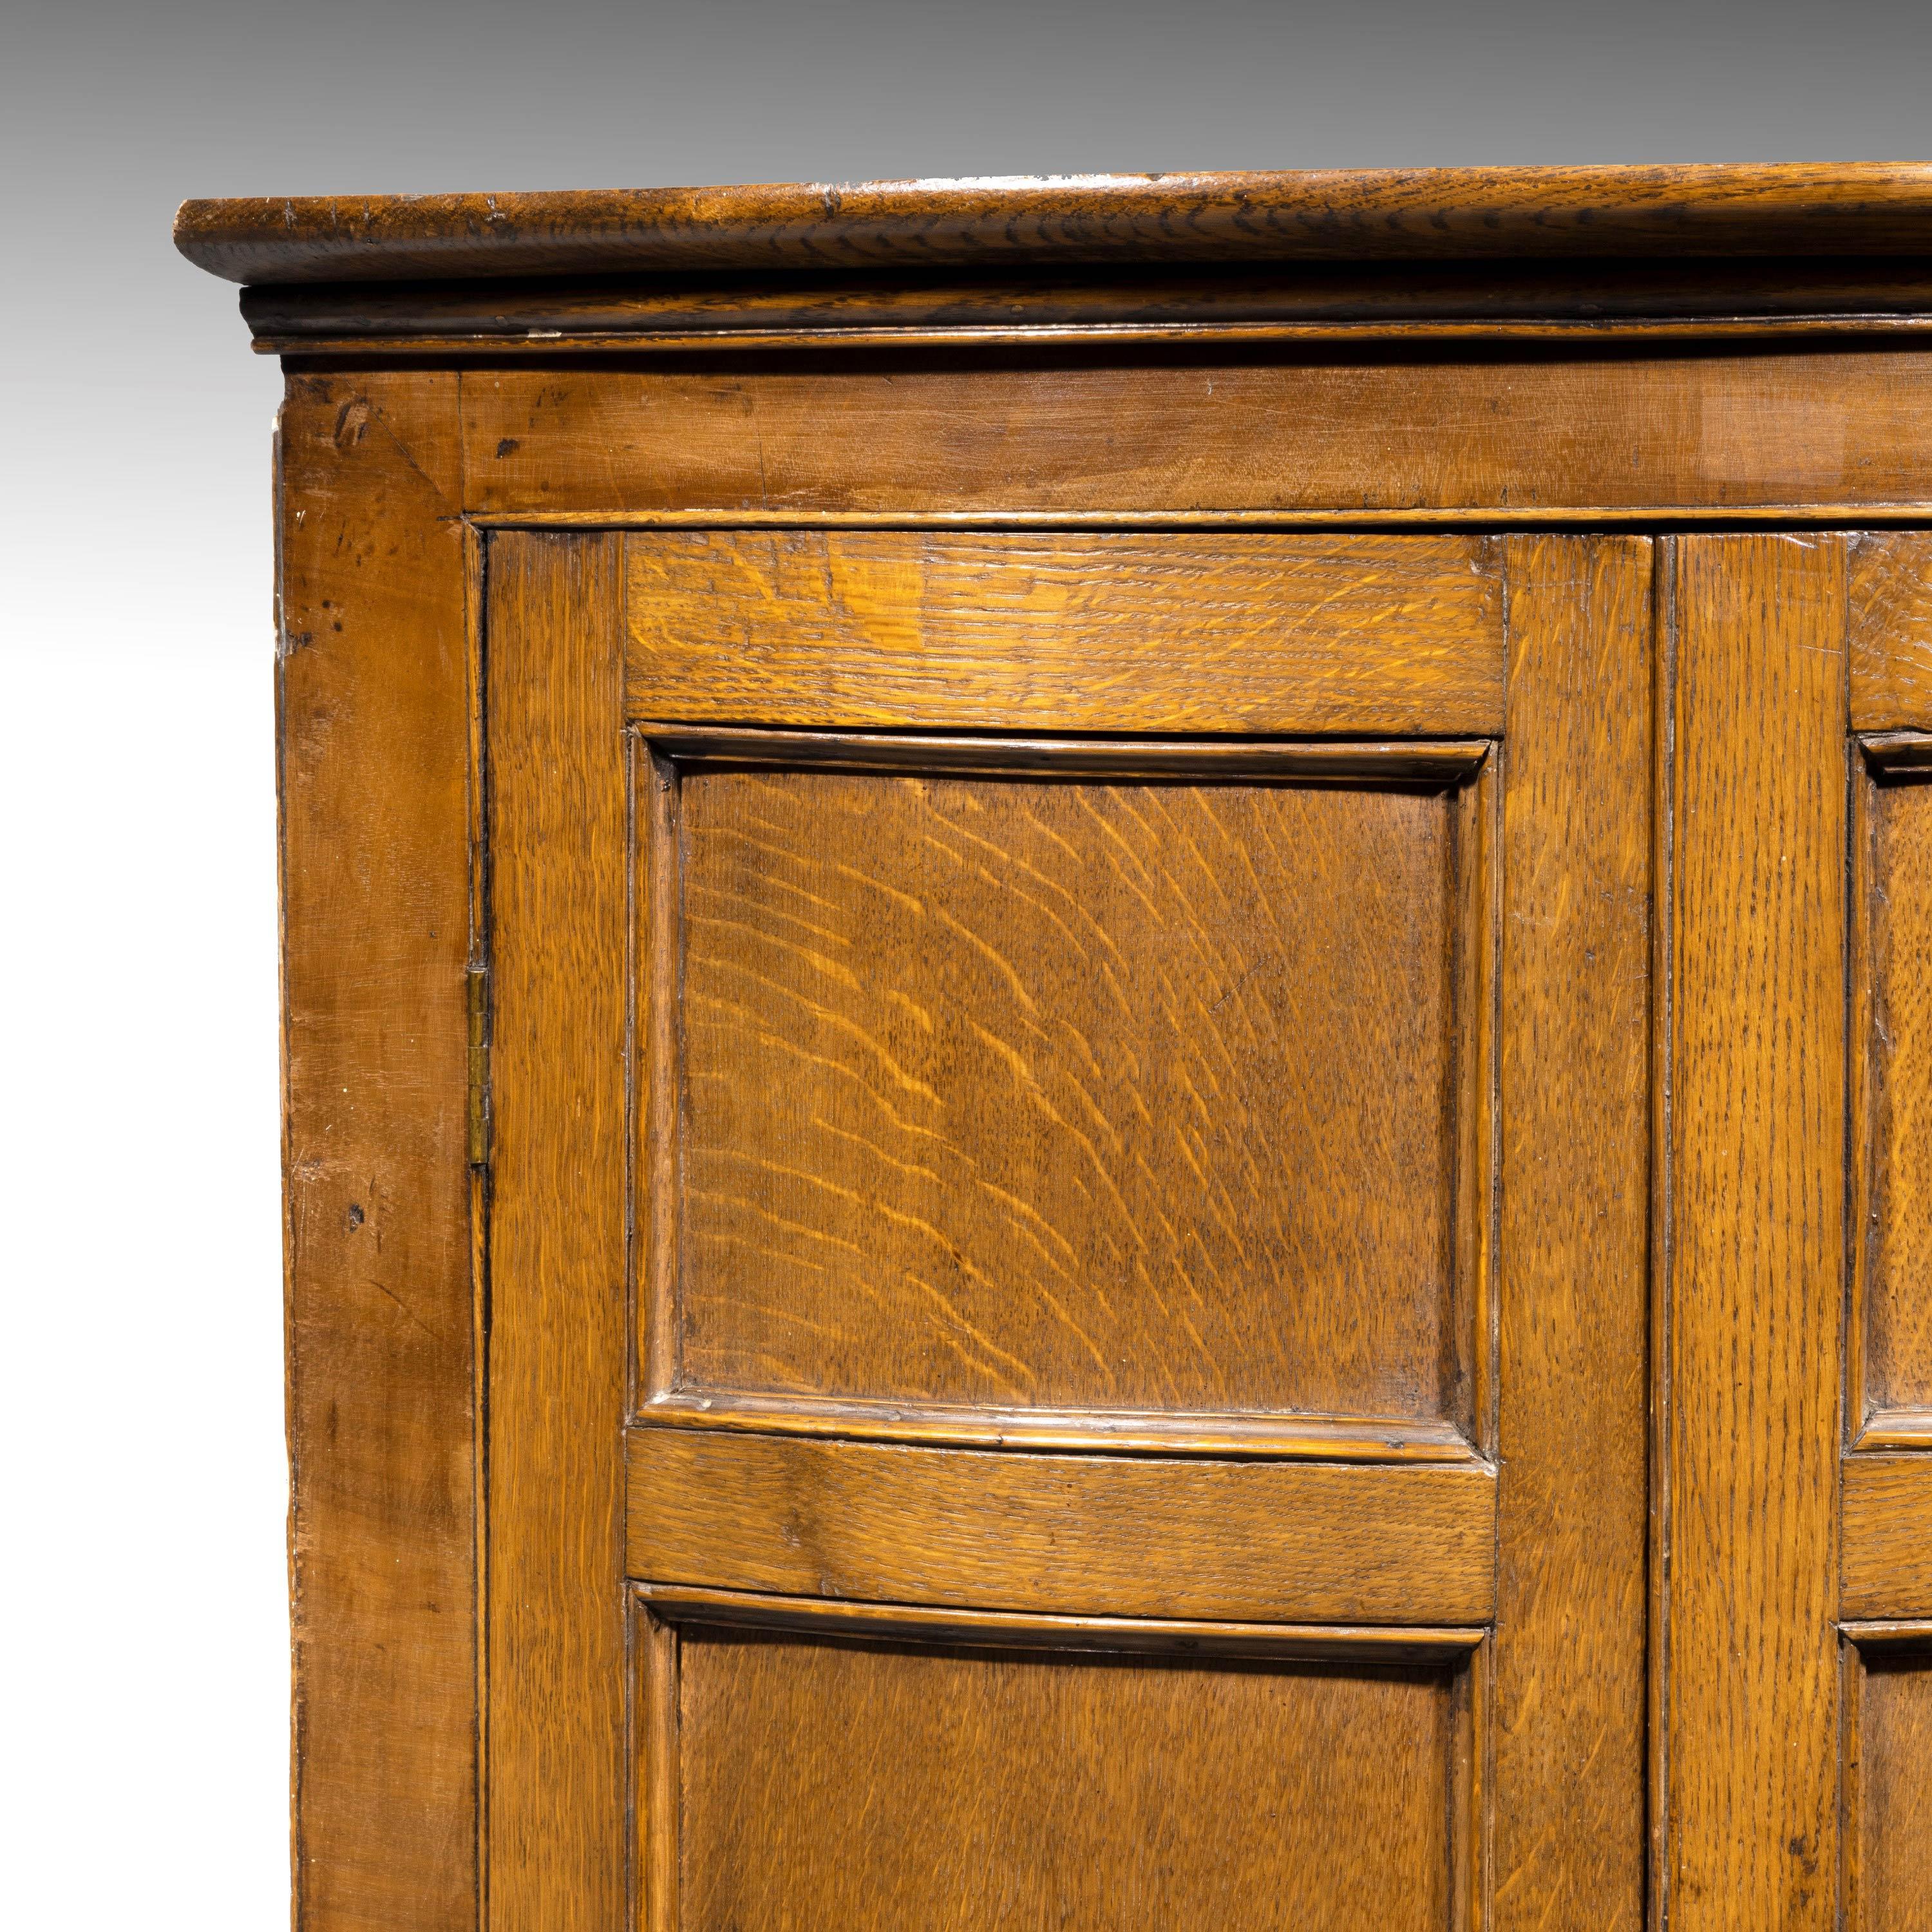 A handsome George III period oak bow-fronted corner cupboard. With recessed door sections. From a very good workshop and of quite complex construction.
   